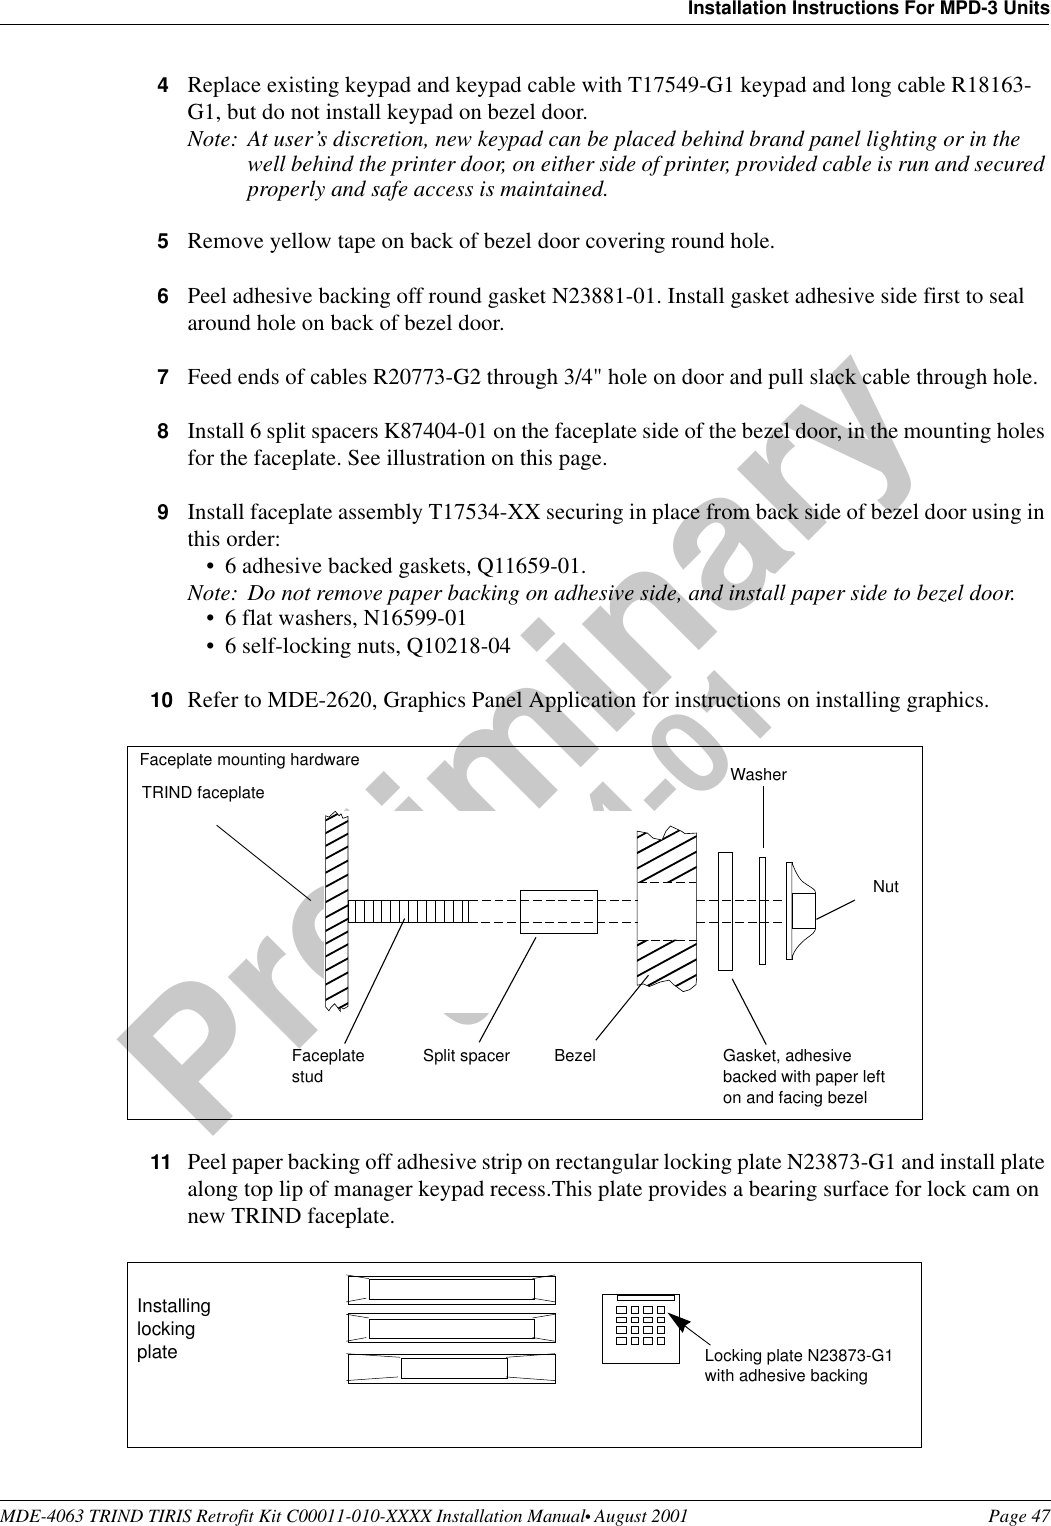 MDE-4063 TRIND TIRIS Retrofit Kit C00011-010-XXXX Installation Manual• August 2001 Page 47Installation Instructions For MPD-3 UnitsPreliminary08-24-014Replace existing keypad and keypad cable with T17549-G1 keypad and long cable R18163-G1, but do not install keypad on bezel door.Note: At user’s discretion, new keypad can be placed behind brand panel lighting or in the well behind the printer door, on either side of printer, provided cable is run and secured properly and safe access is maintained.5Remove yellow tape on back of bezel door covering round hole.6Peel adhesive backing off round gasket N23881-01. Install gasket adhesive side first to seal around hole on back of bezel door.7Feed ends of cables R20773-G2 through 3/4&quot; hole on door and pull slack cable through hole.8Install 6 split spacers K87404-01 on the faceplate side of the bezel door, in the mounting holes for the faceplate. See illustration on this page.9Install faceplate assembly T17534-XX securing in place from back side of bezel door using in this order:•6 adhesive backed gaskets, Q11659-01.Note: Do not remove paper backing on adhesive side, and install paper side to bezel door.•6 flat washers, N16599-01•6 self-locking nuts, Q10218-0410 Refer to MDE-2620, Graphics Panel Application for instructions on installing graphics. 11 Peel paper backing off adhesive strip on rectangular locking plate N23873-G1 and install plate along top lip of manager keypad recess.This plate provides a bearing surface for lock cam on new TRIND faceplate. TRIND faceplateBezelFaceplate studSplit spacer Gasket, adhesive backed with paper left on and facing bezelWasherNutFaceplate mounting hardwareLocking plate N23873-G1with adhesive backingInstalling locking plate